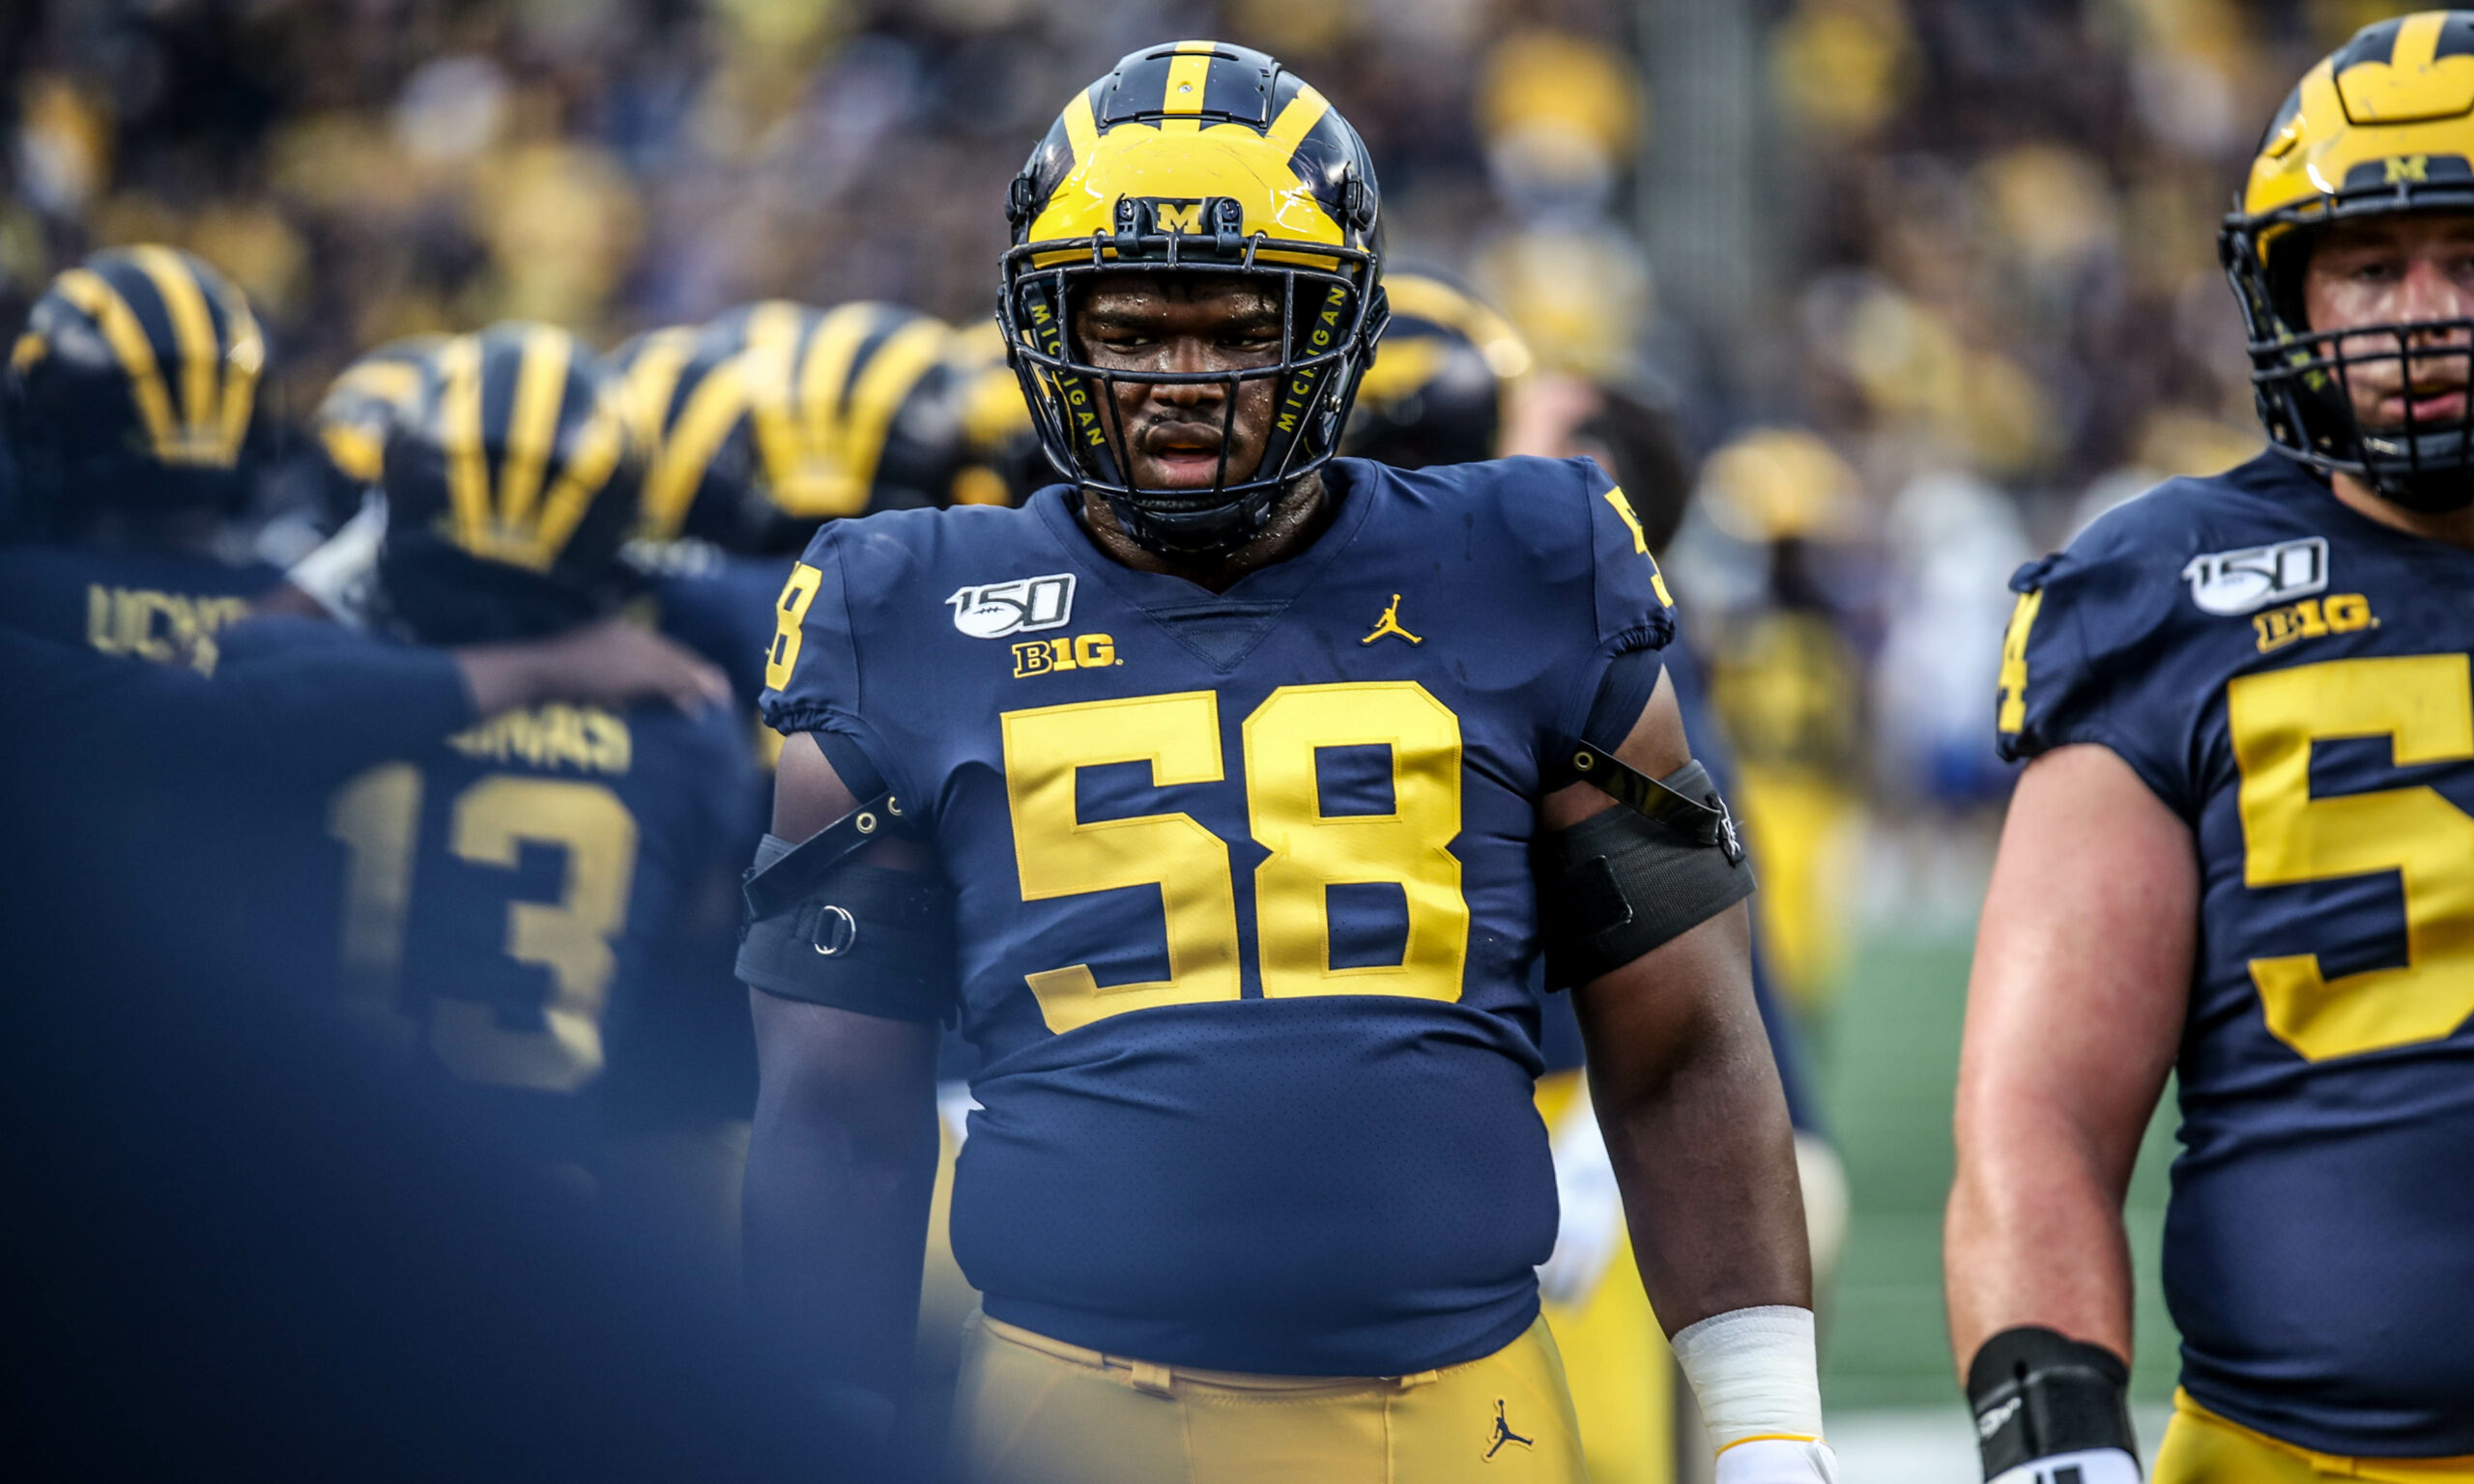 Michigan has four prospects on PFF’s top 100 draft board for 2023